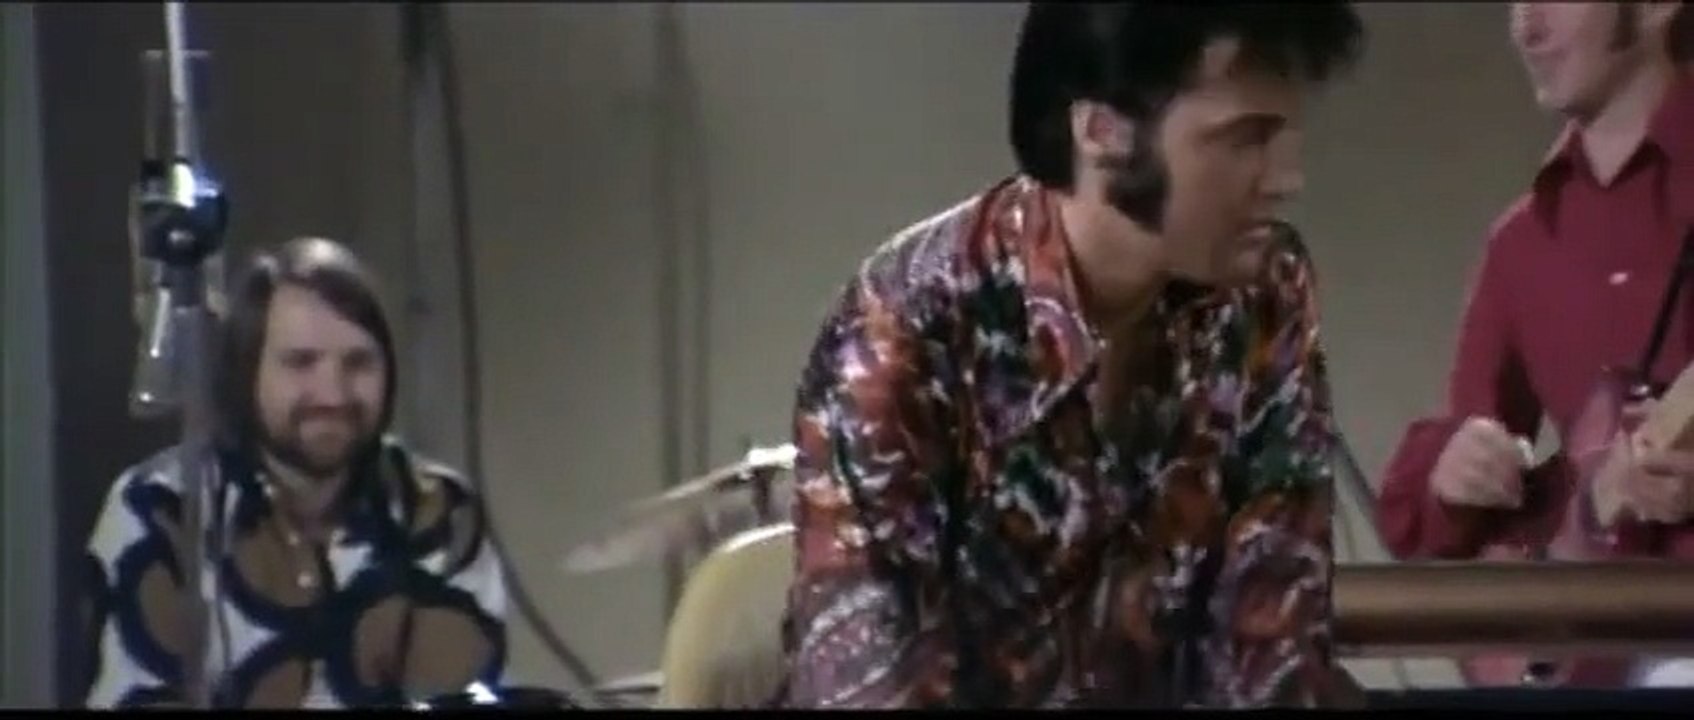 Elvis Presley - I Just Can't Help Believin (rehearsal)